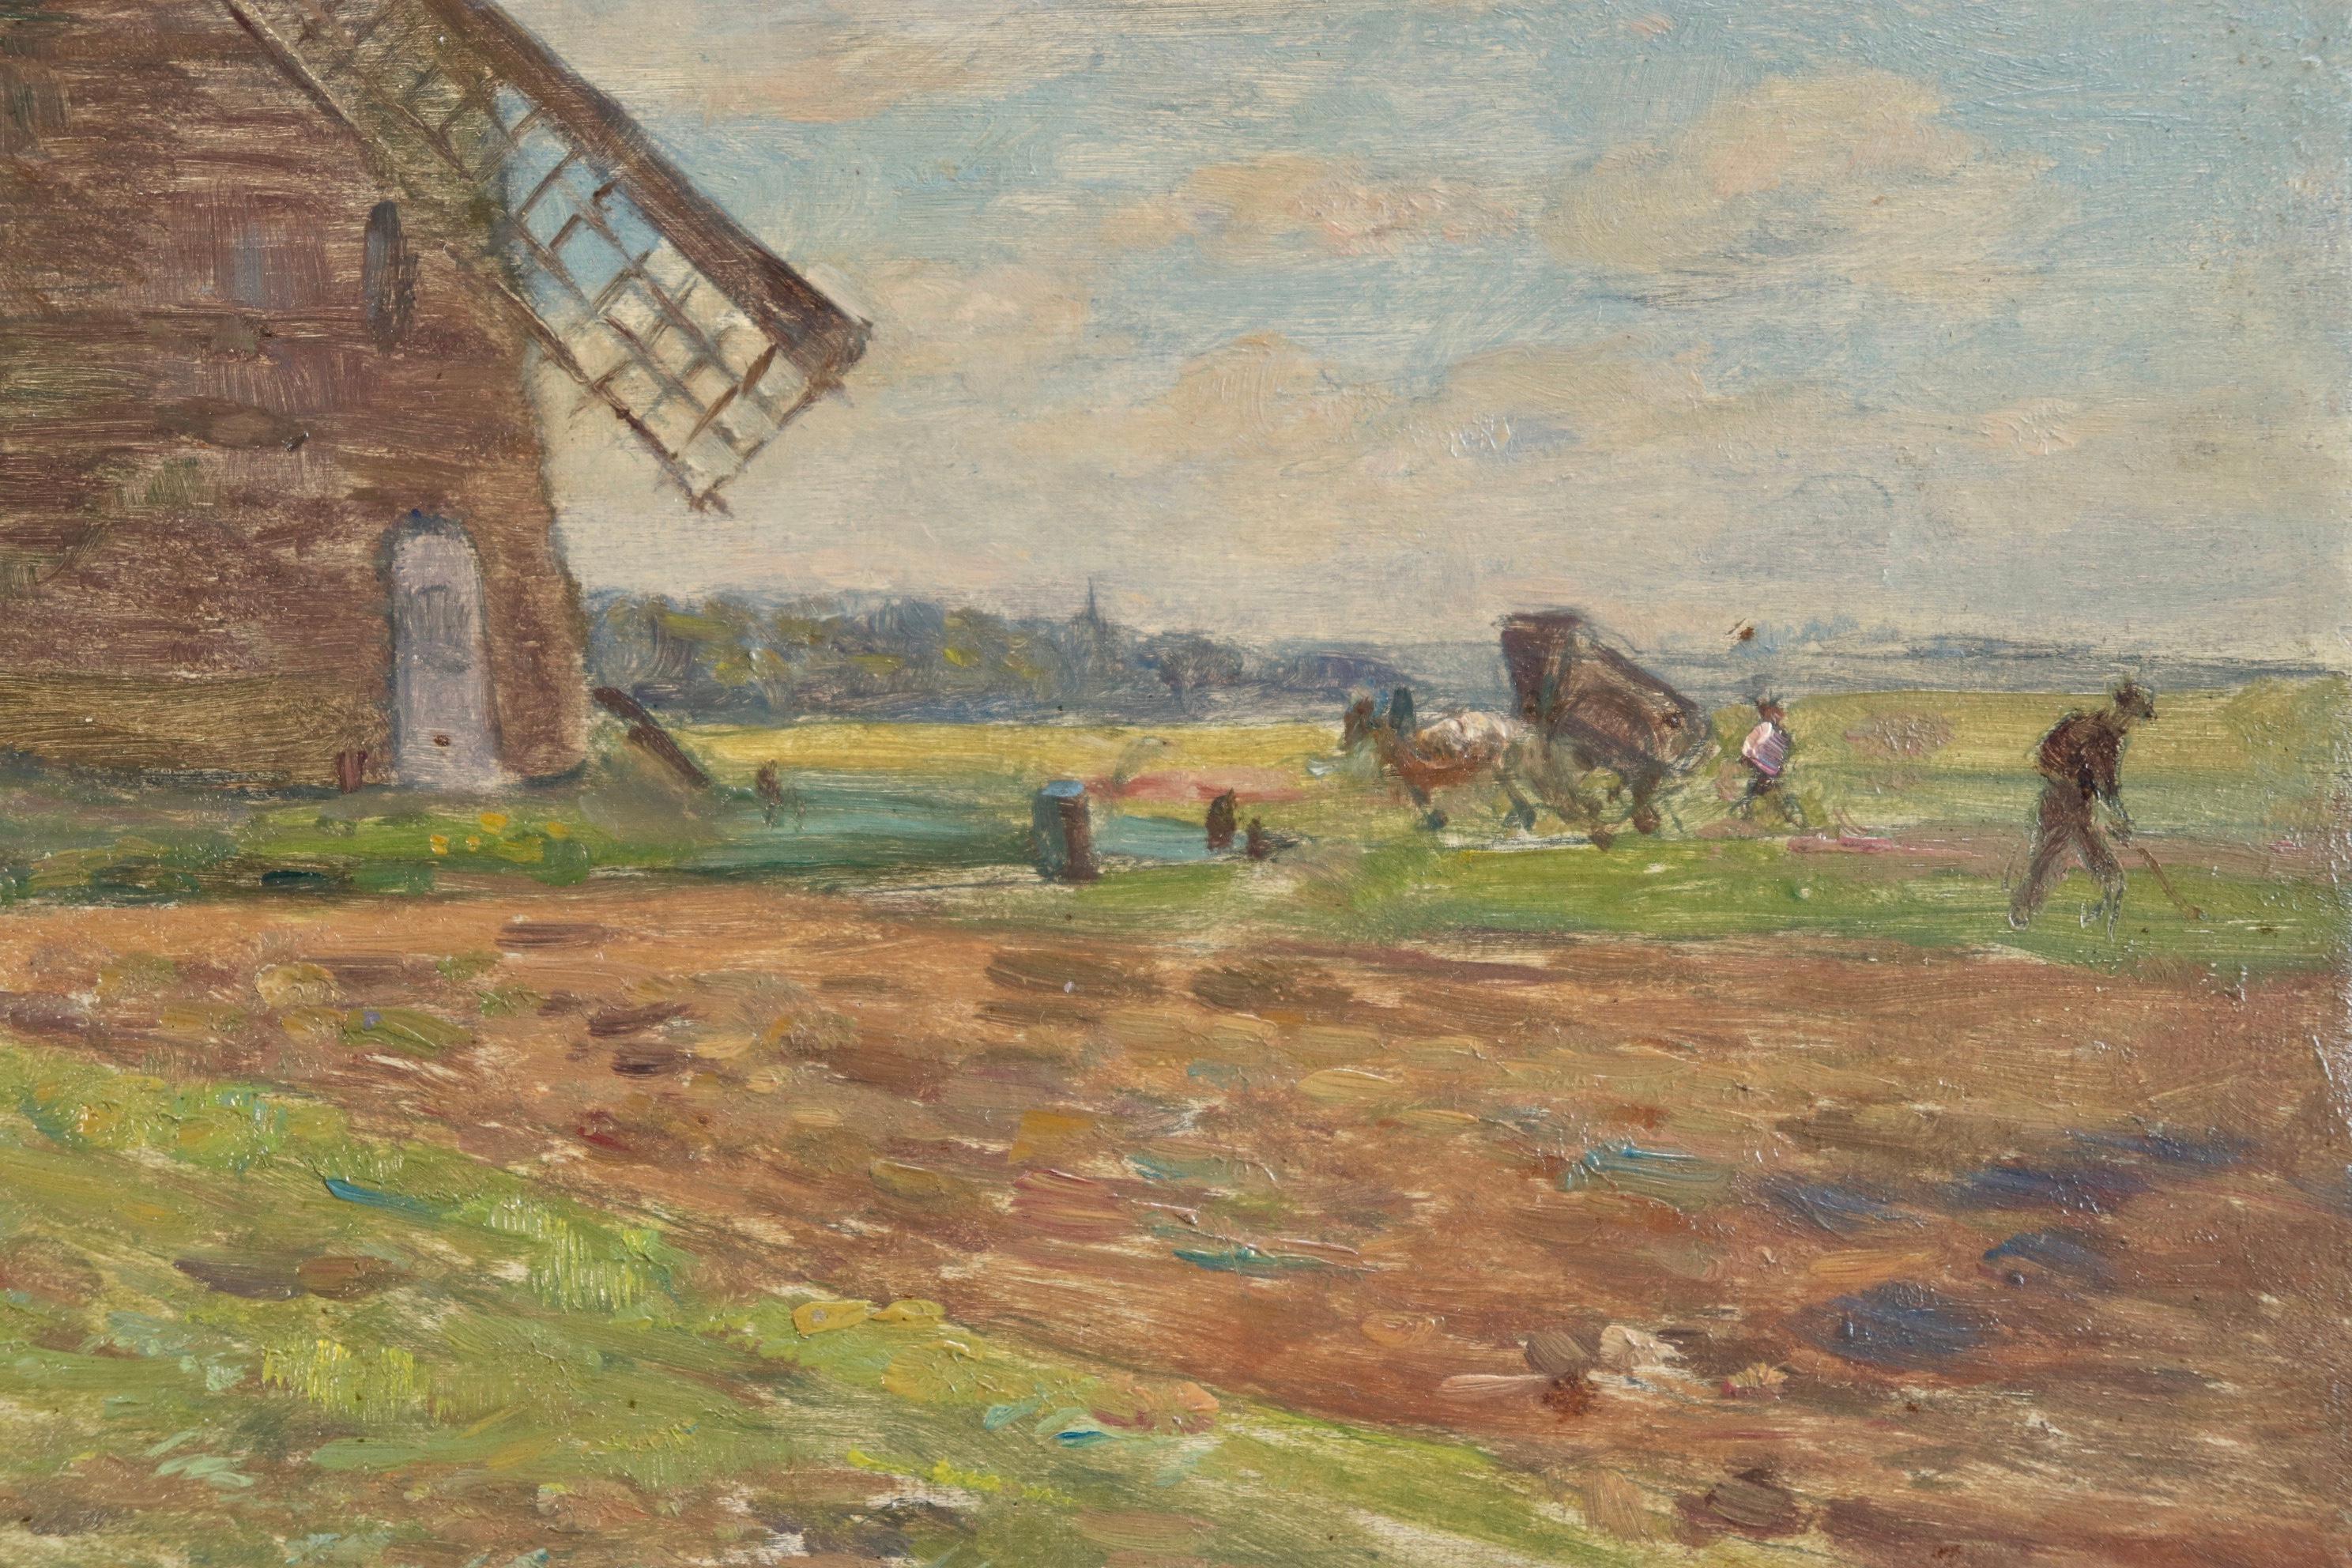 Oil on panel by French Impressionist painter Henri Duhem depicting a windmill in a landscape with workers and a horse and cart below and clouds rolling across the blue sky. Signed lower left and dated 1911 verso. This painting is not currently